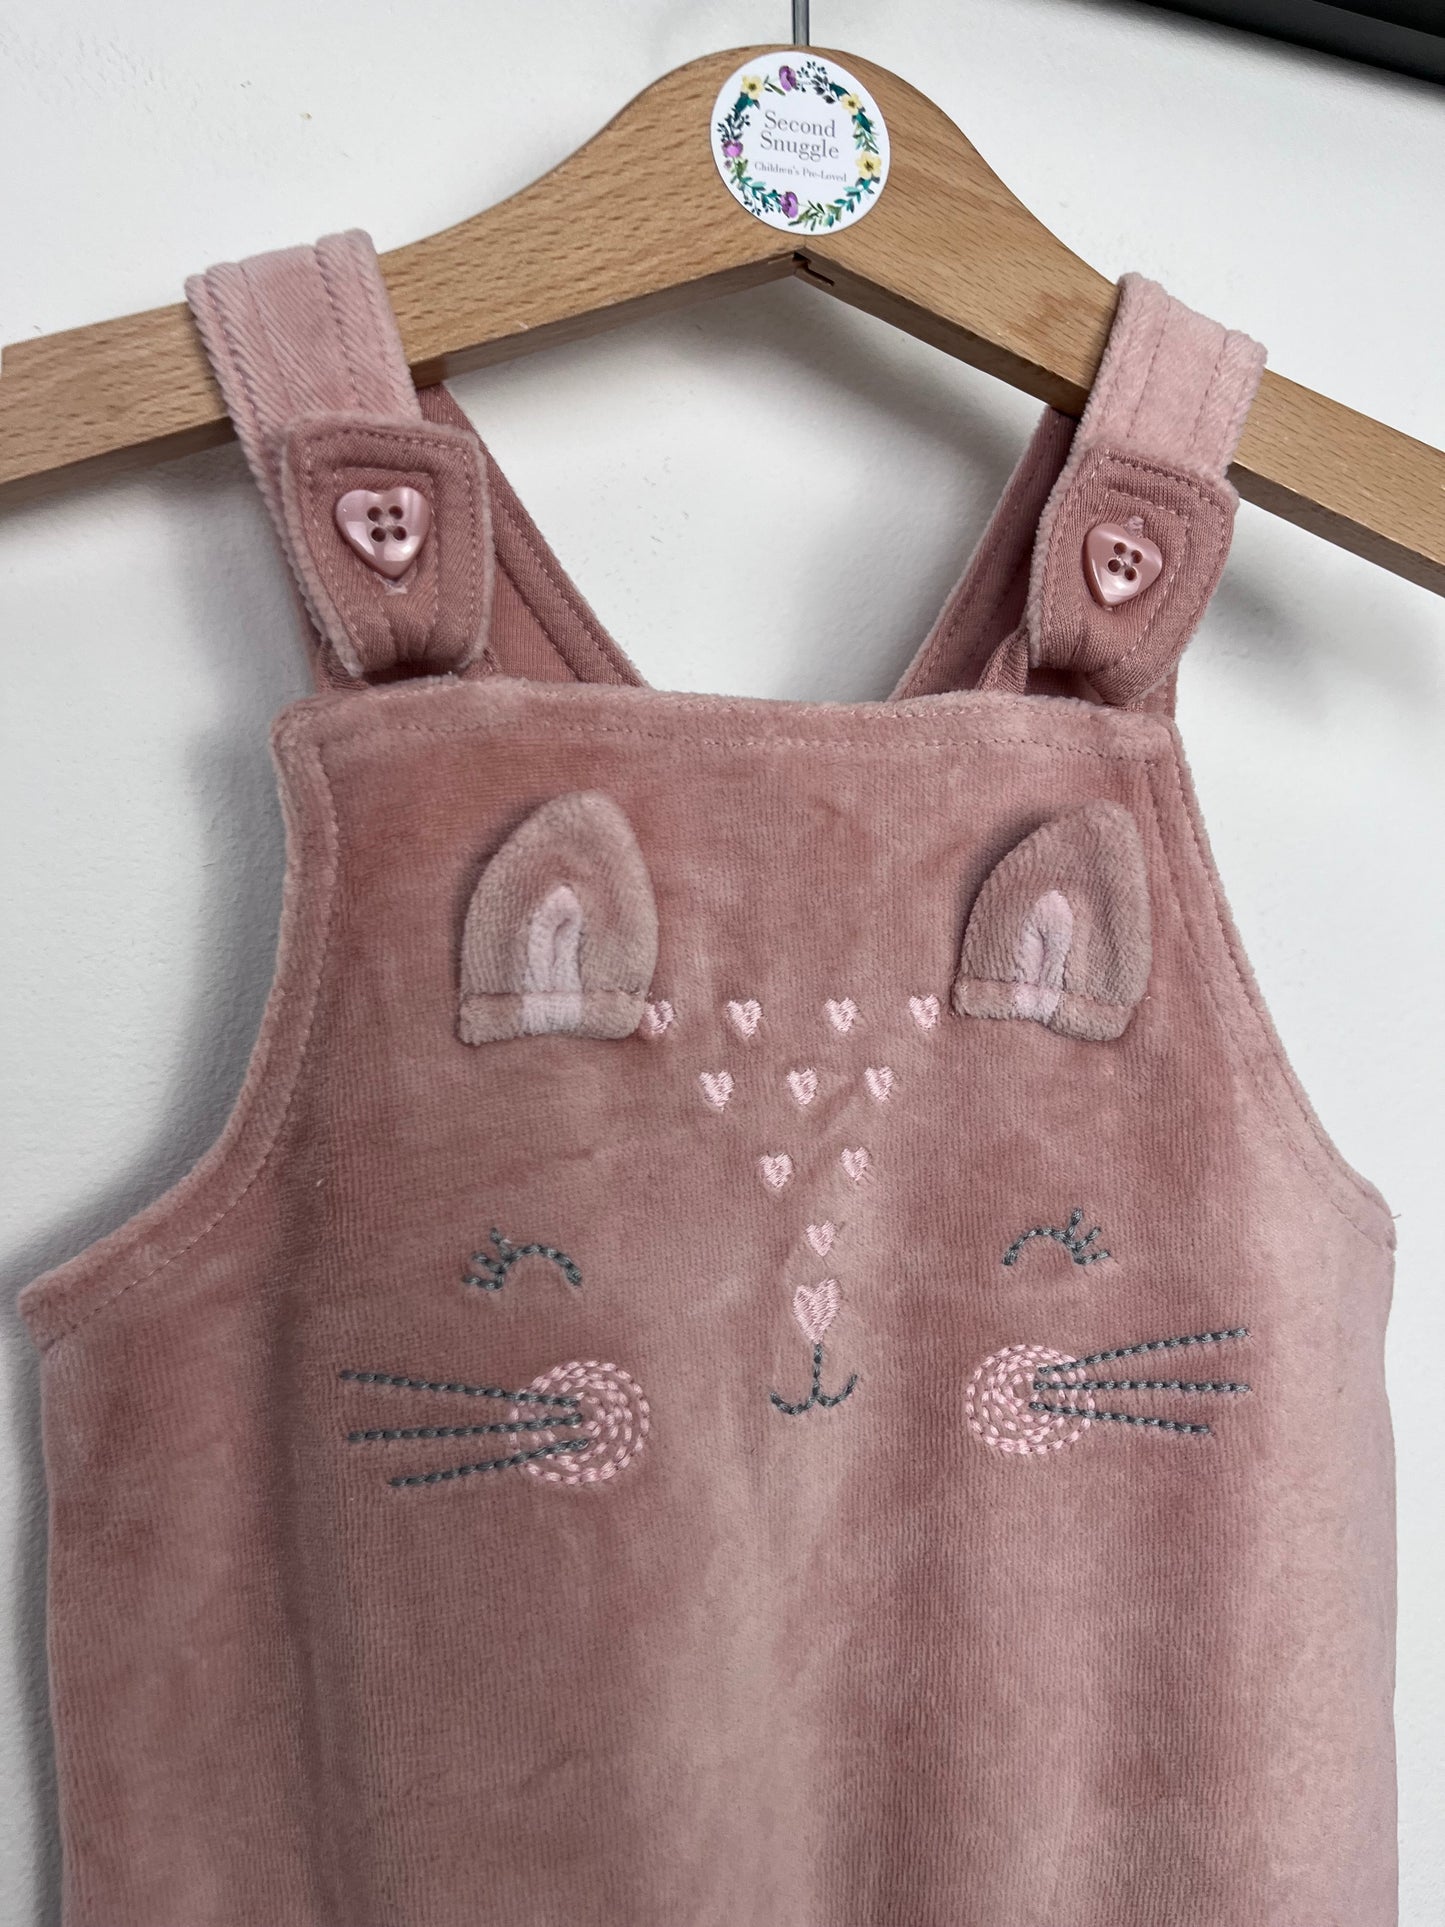 George 3-6 Months-Dungarees-Second Snuggle Preloved